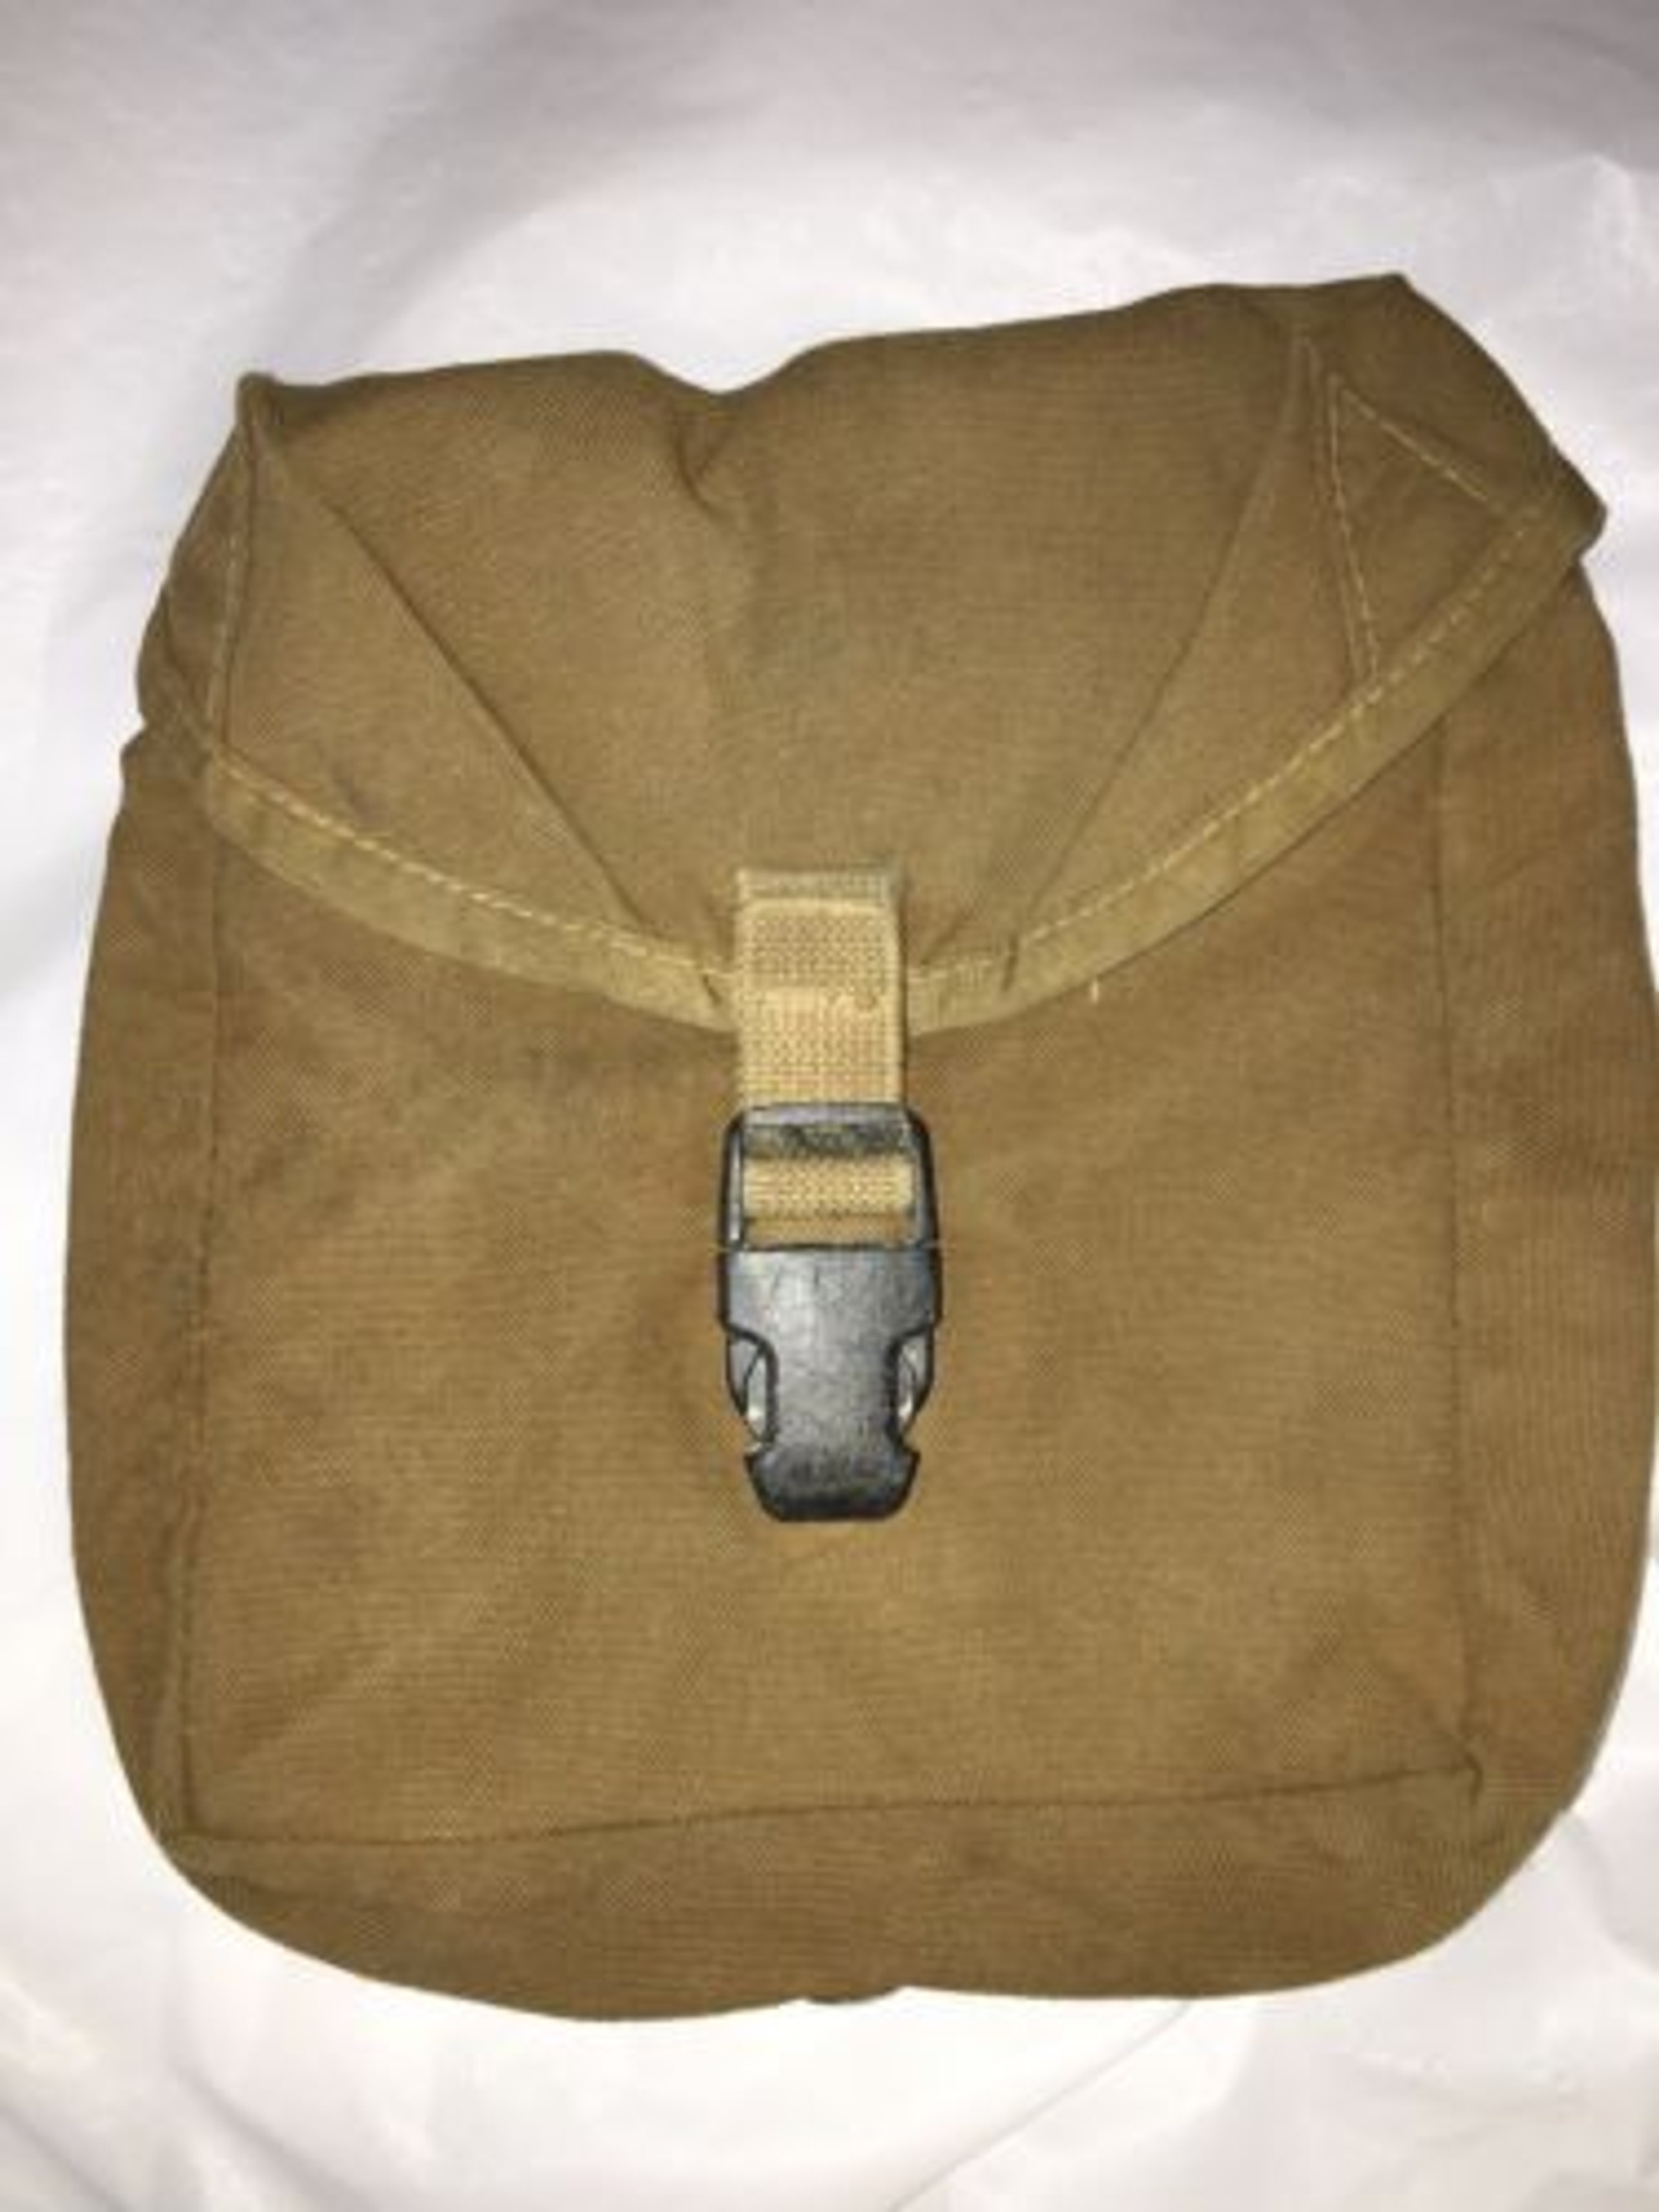 U.S. Armed Forces Individual First Aid Kit Pouch - Coyote